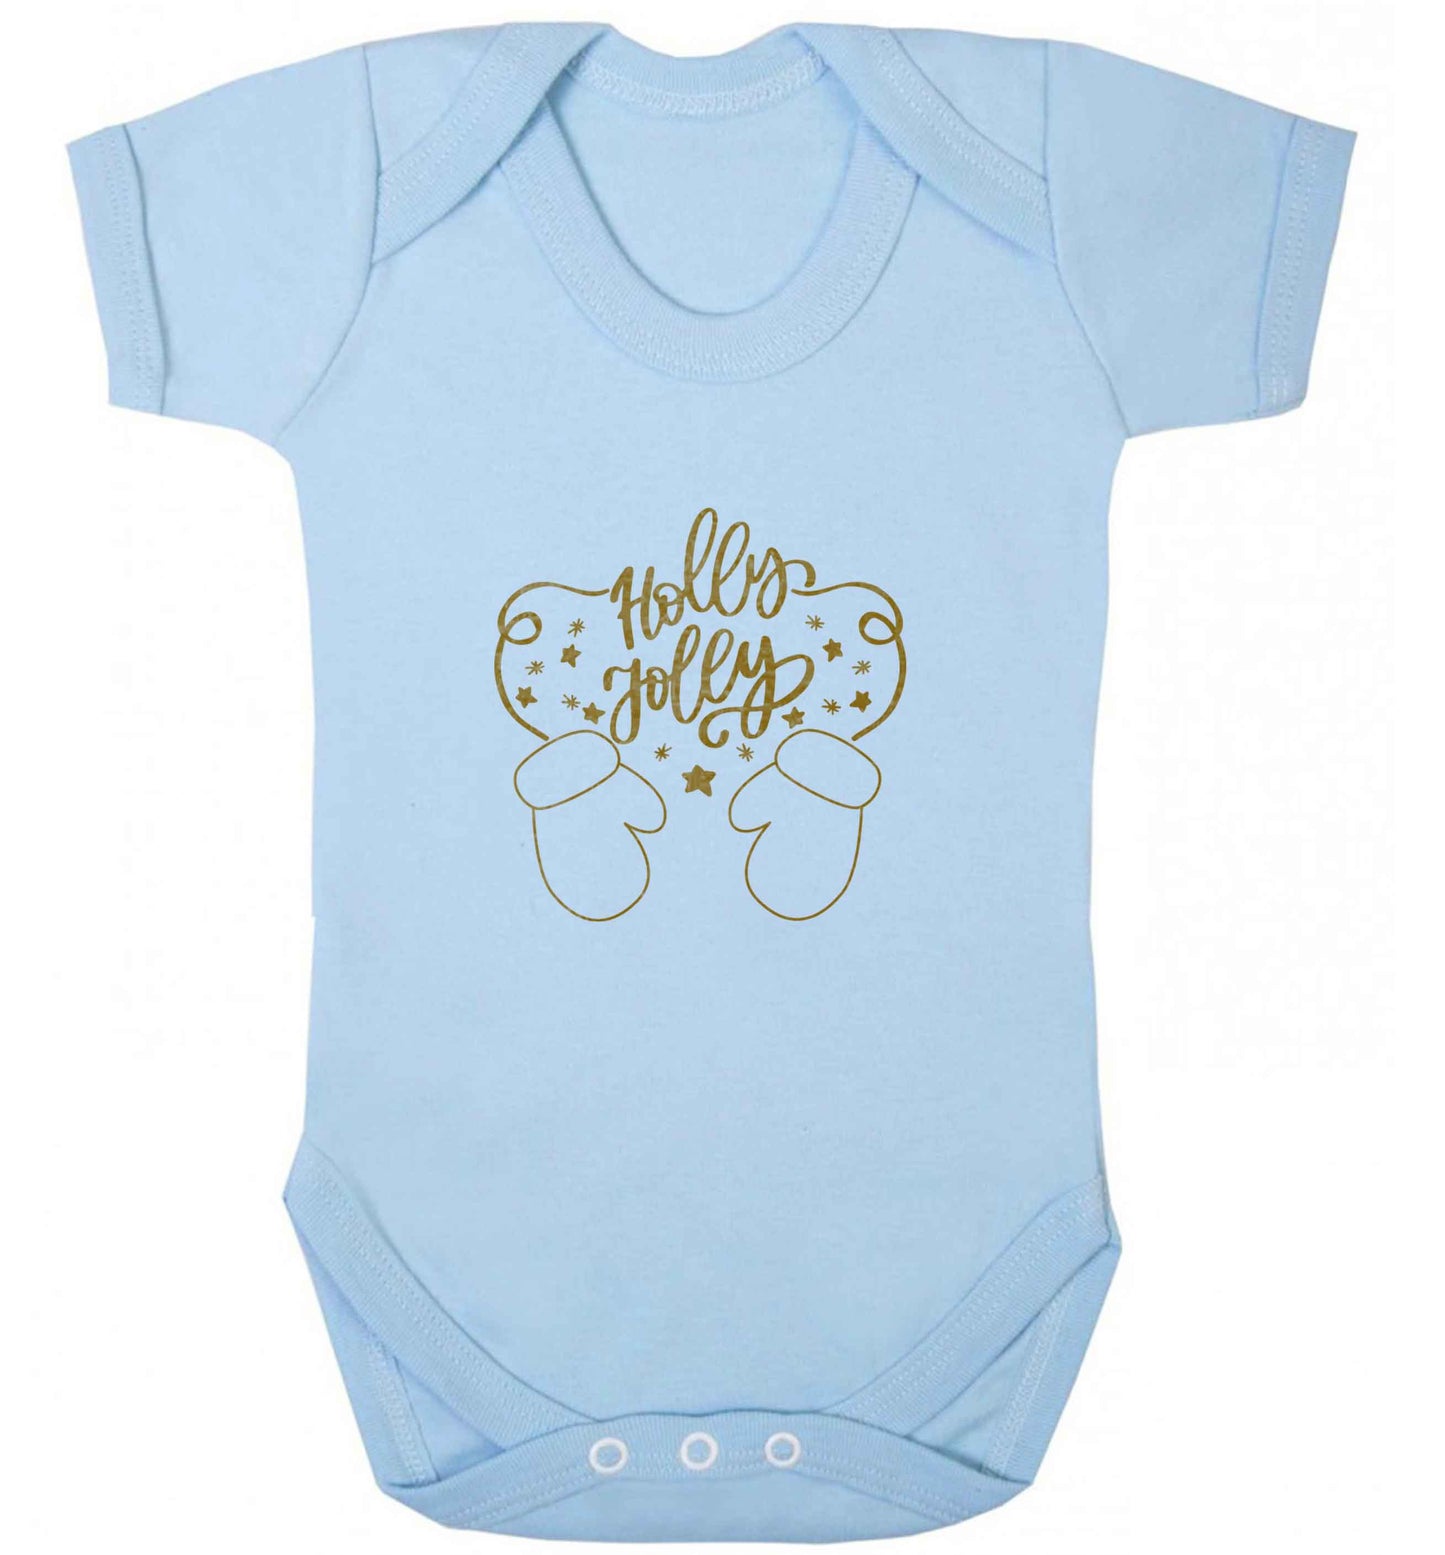 Holly jolly baby vest pale blue 18-24 months